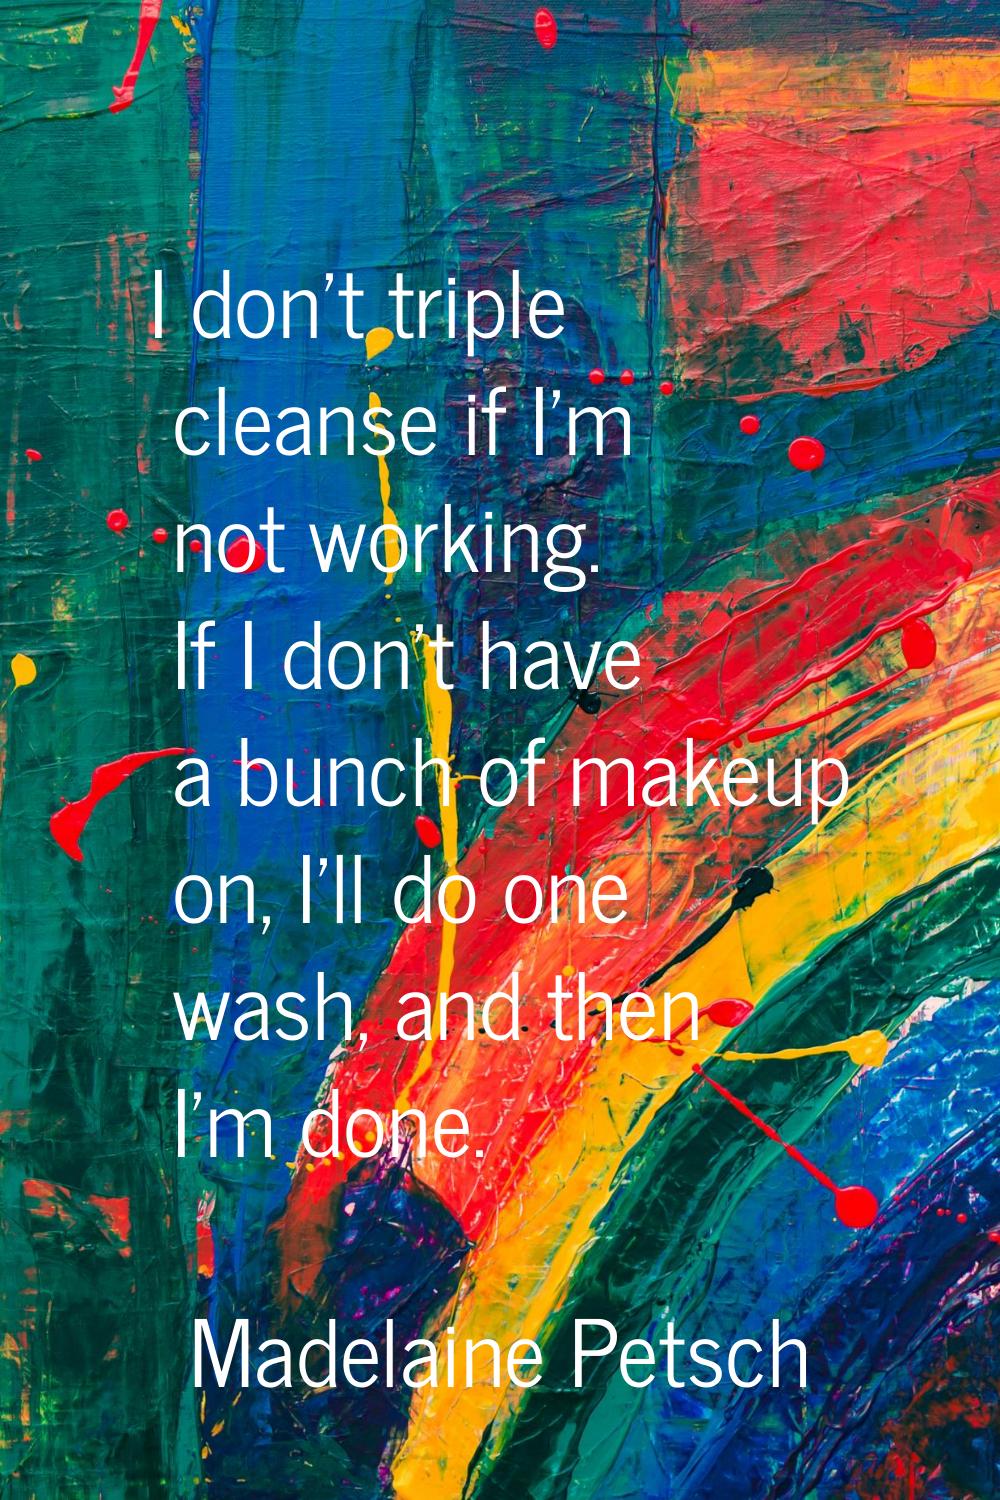 I don't triple cleanse if I'm not working. If I don't have a bunch of makeup on, I'll do one wash, 